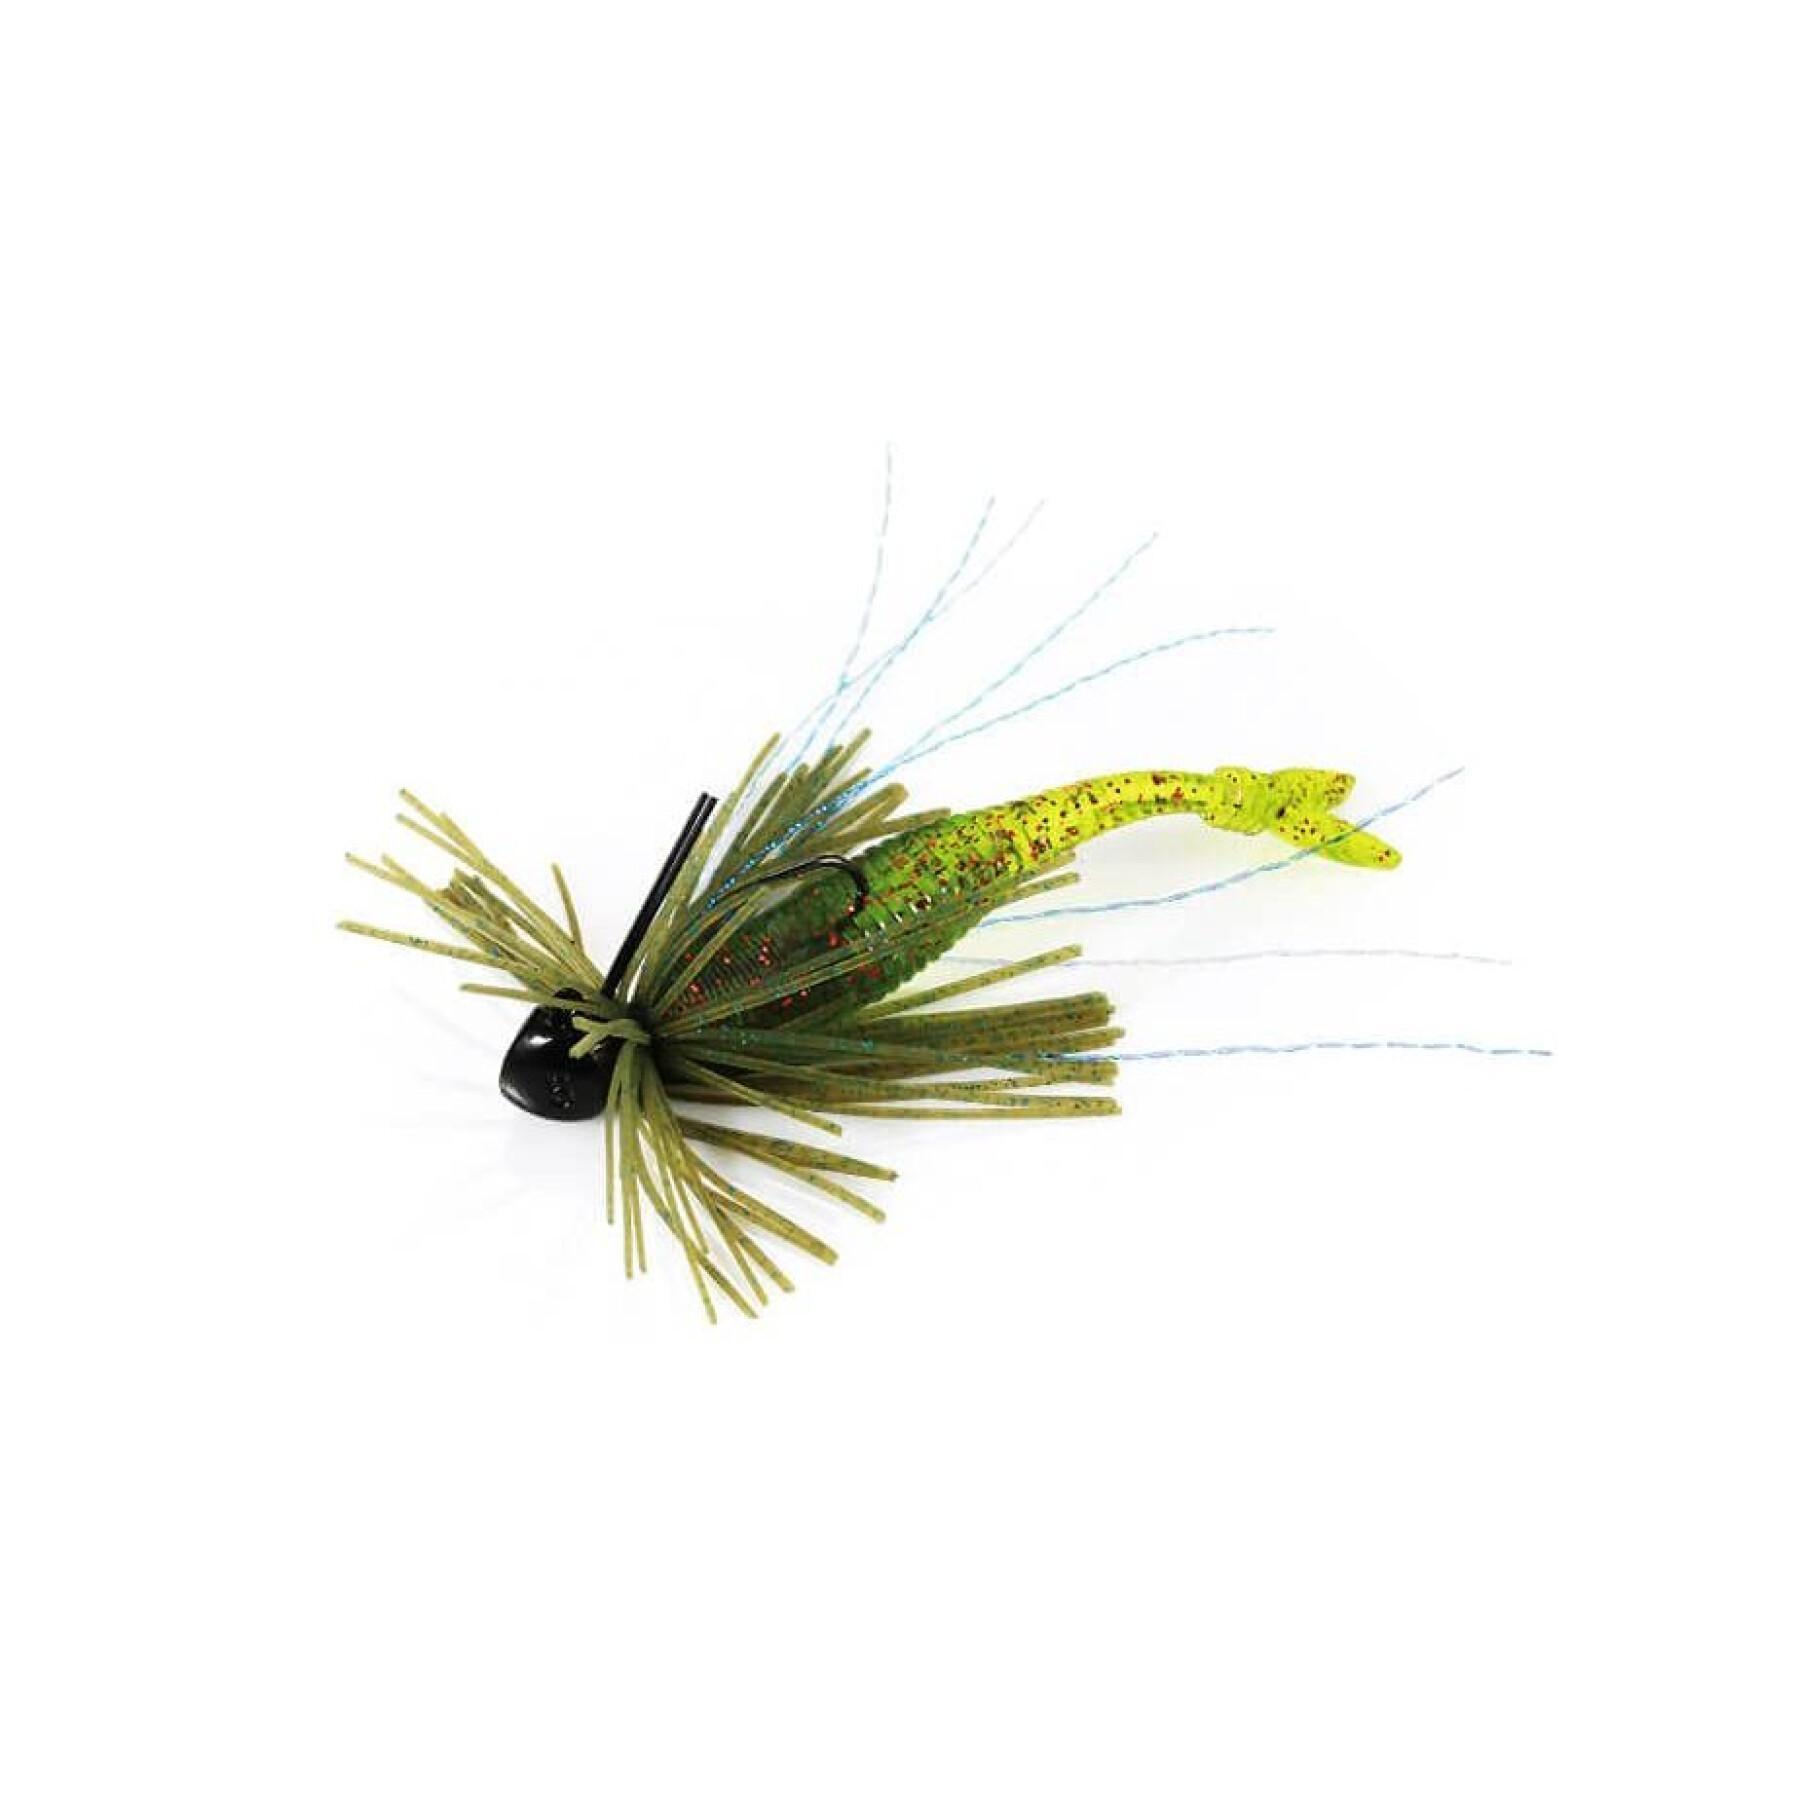 Atraer a Duo Small Rubber Realis Jig 1,3g